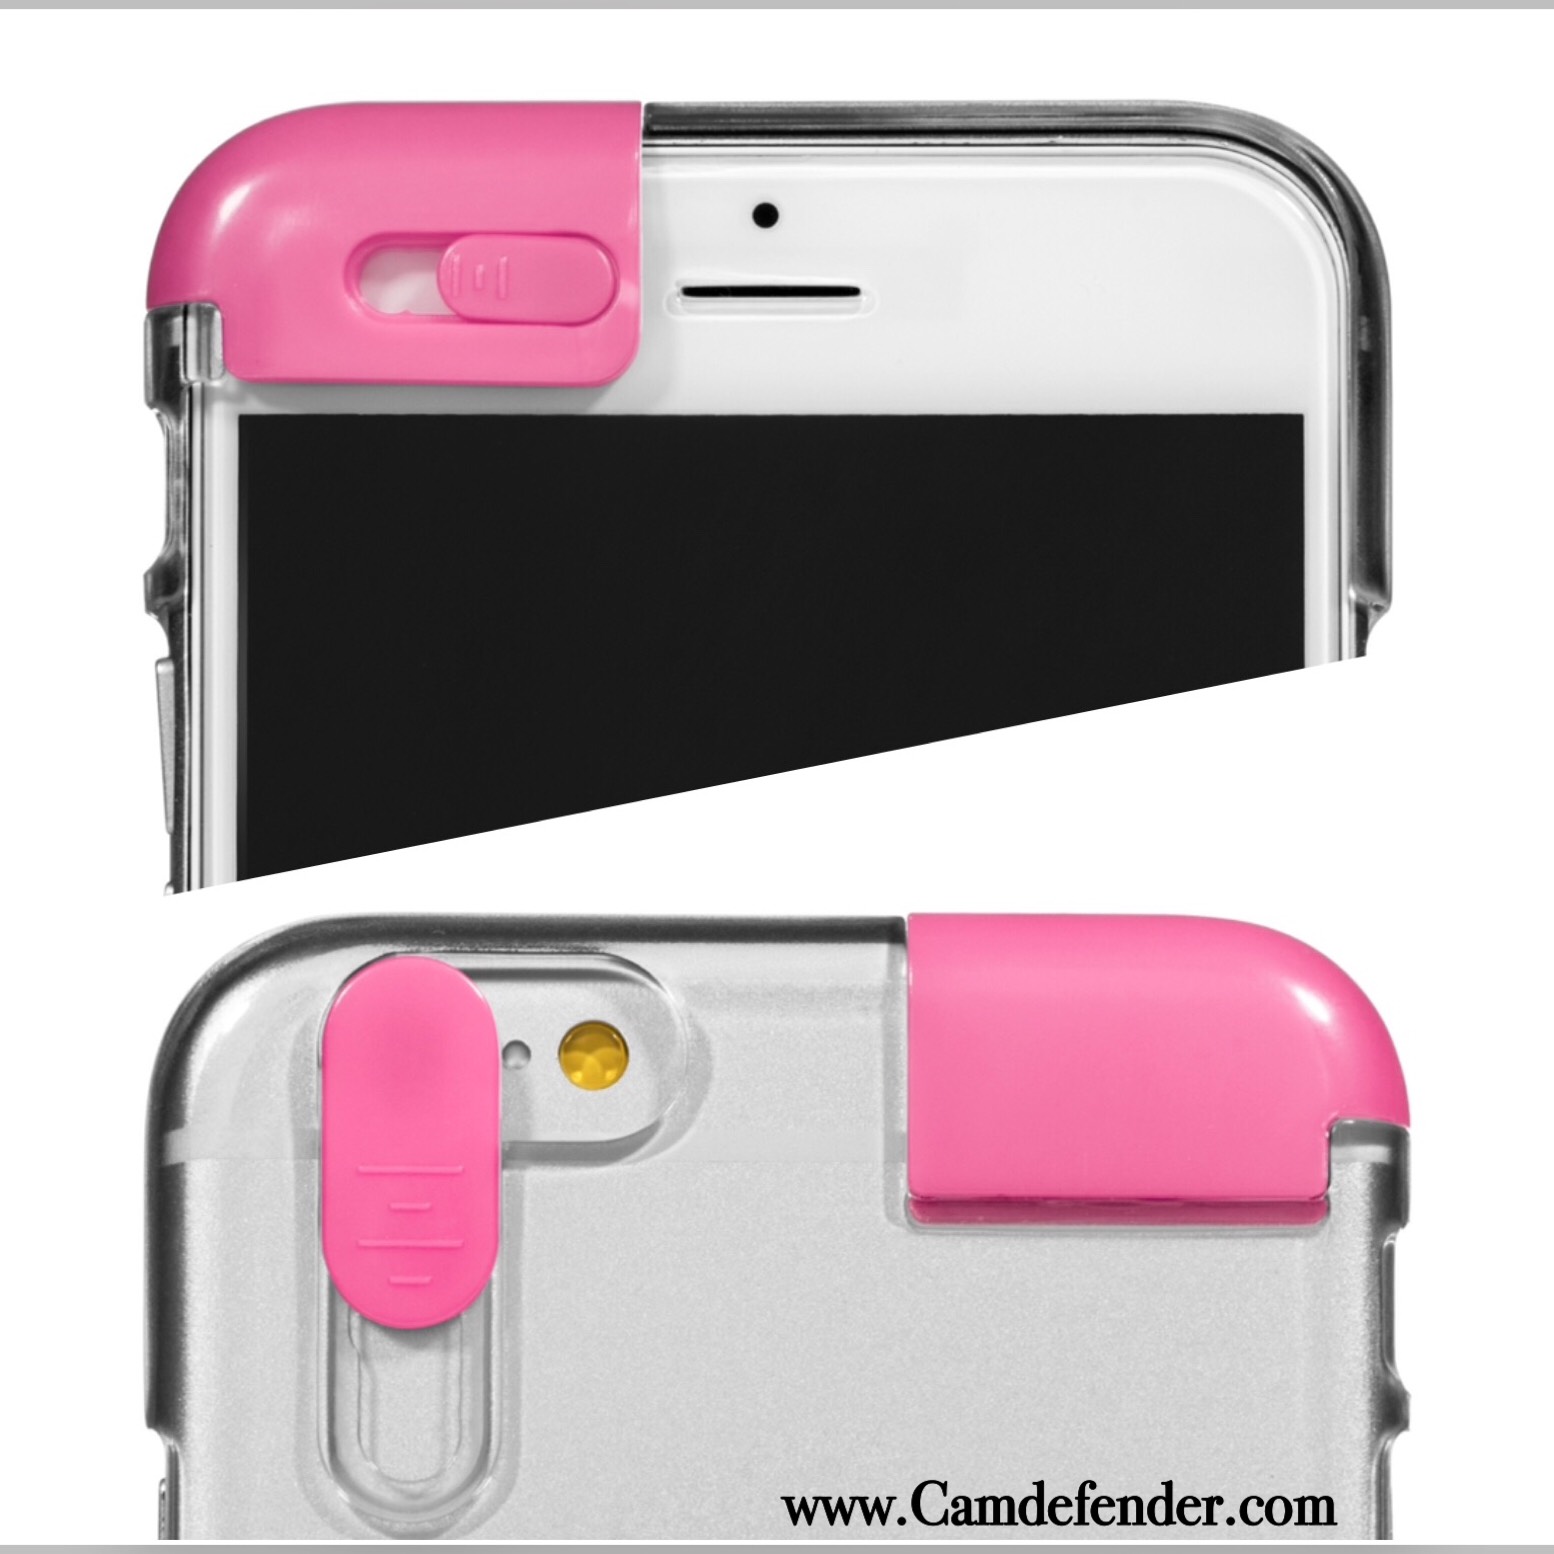 The cell phone case features two independent camera lens covers which can be positioned over the camera when not in use.